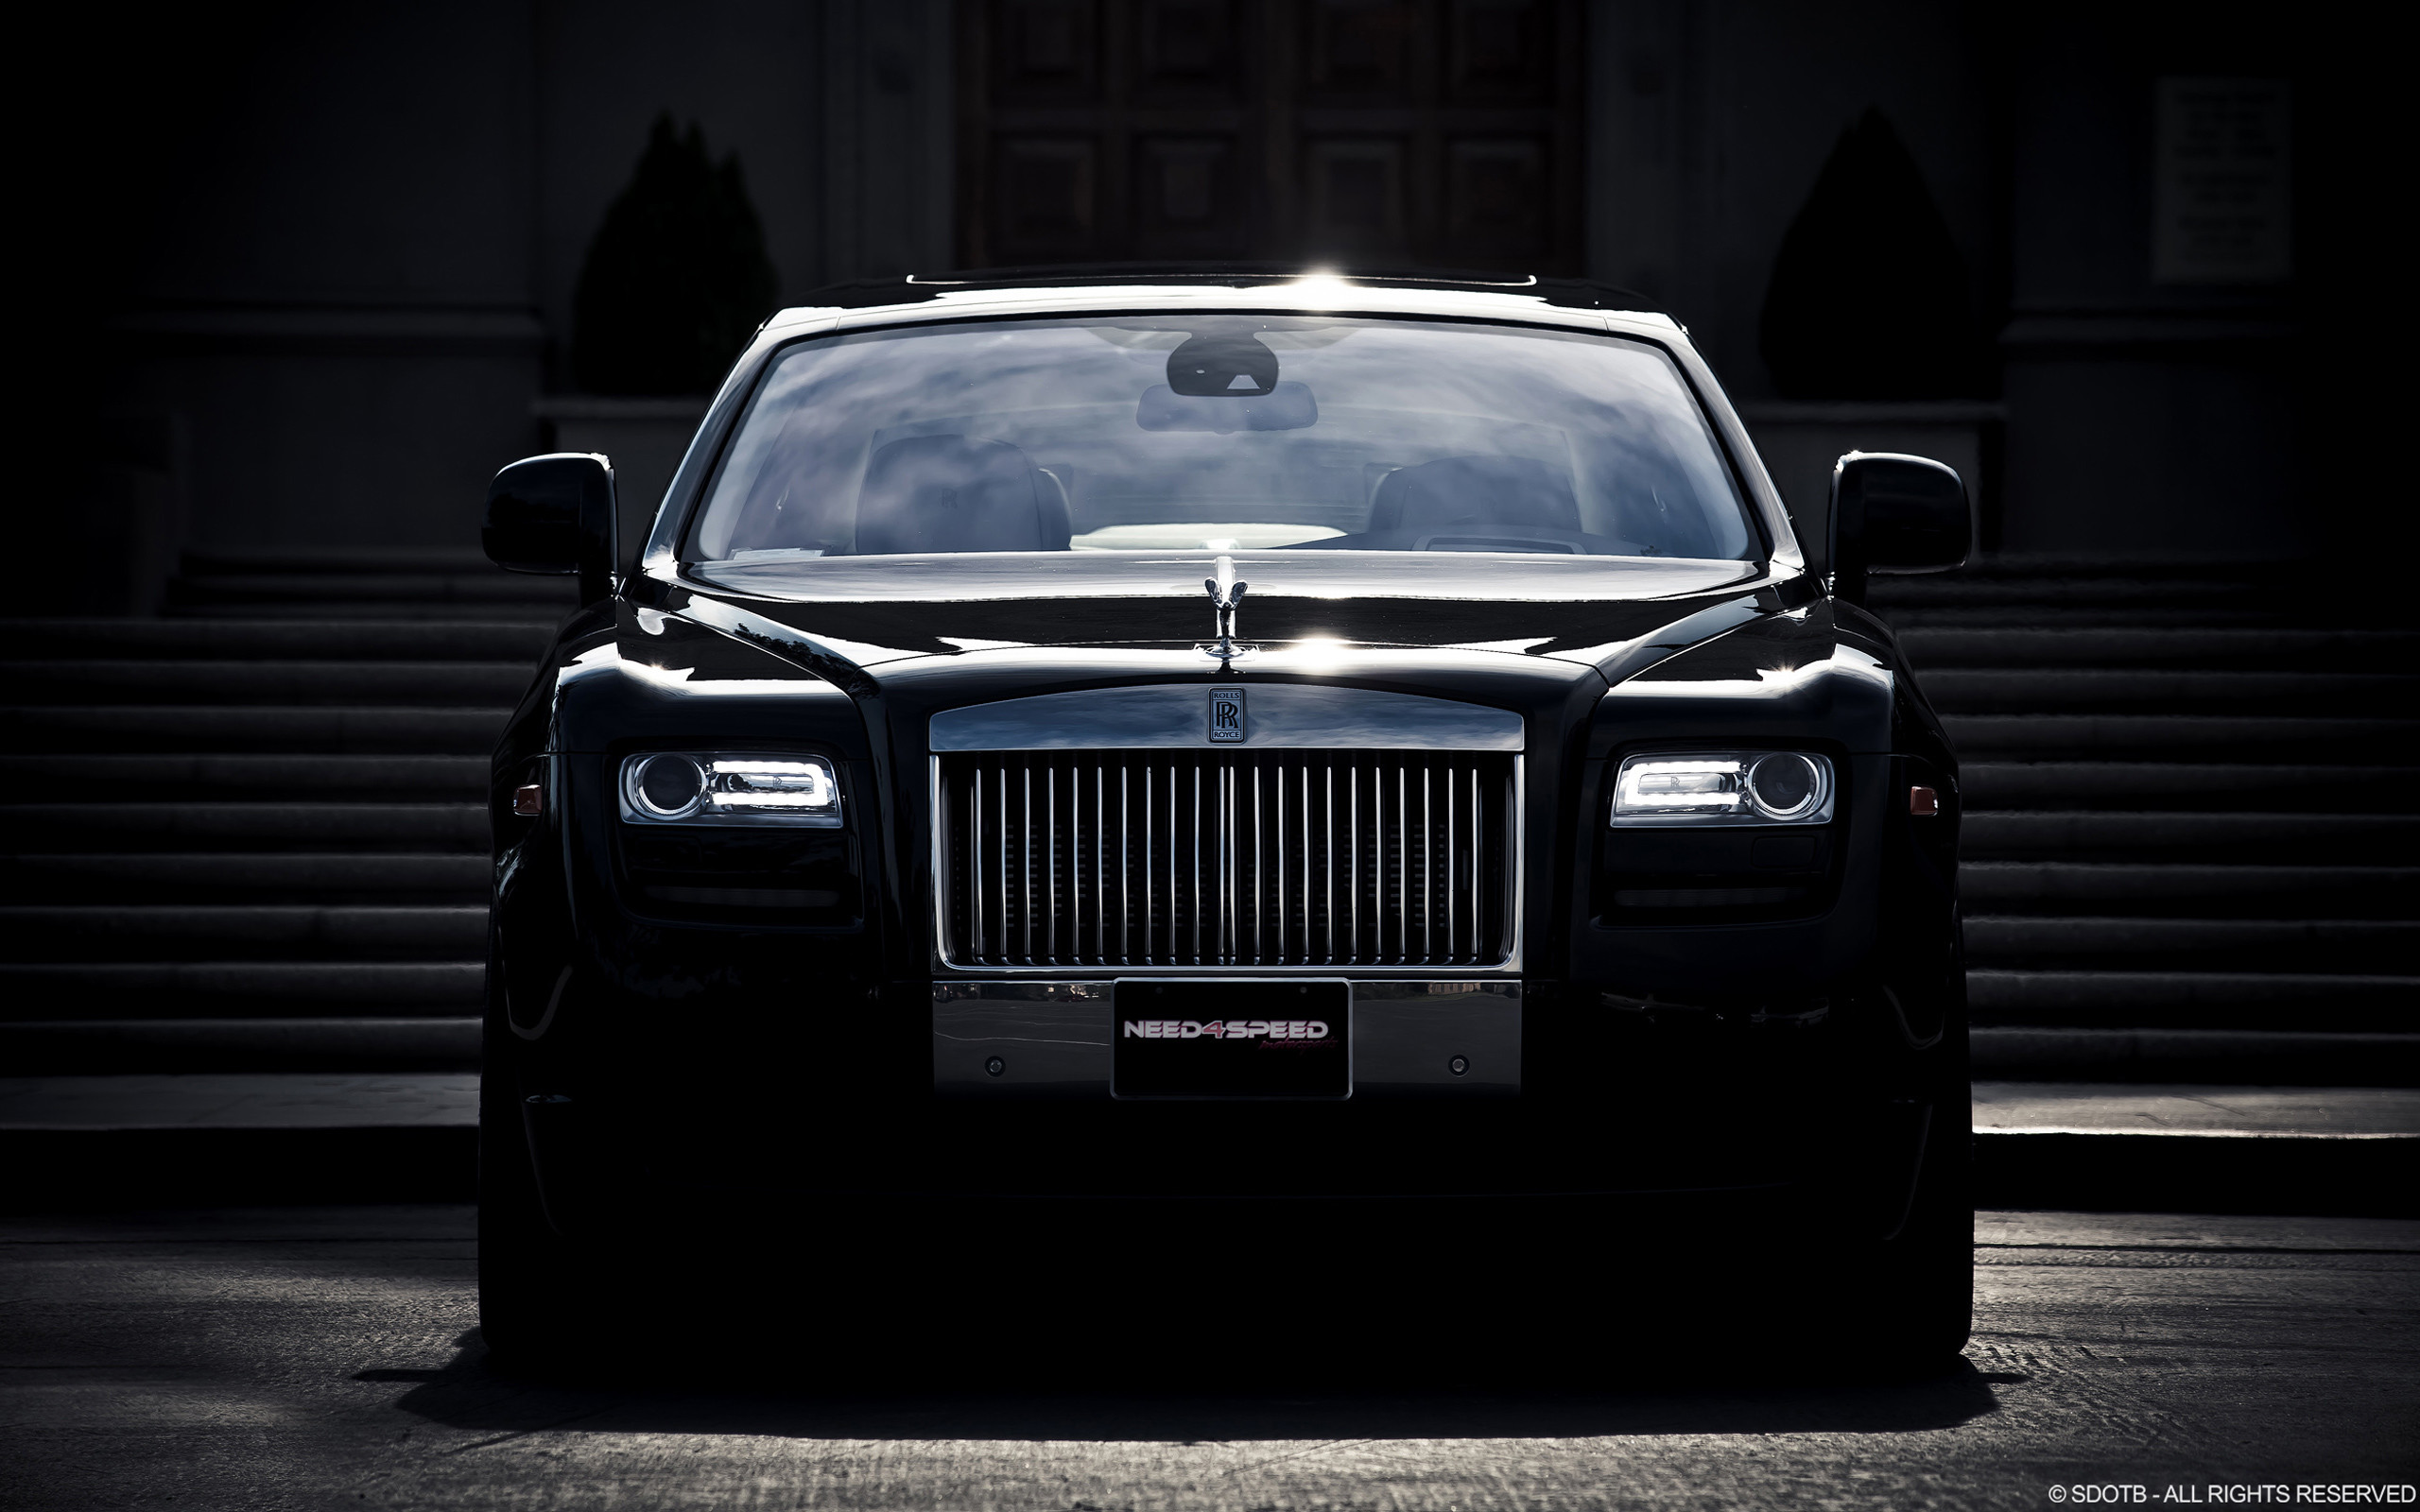 550 Rolls Royce Pictures  Download Free Images on Unsplash